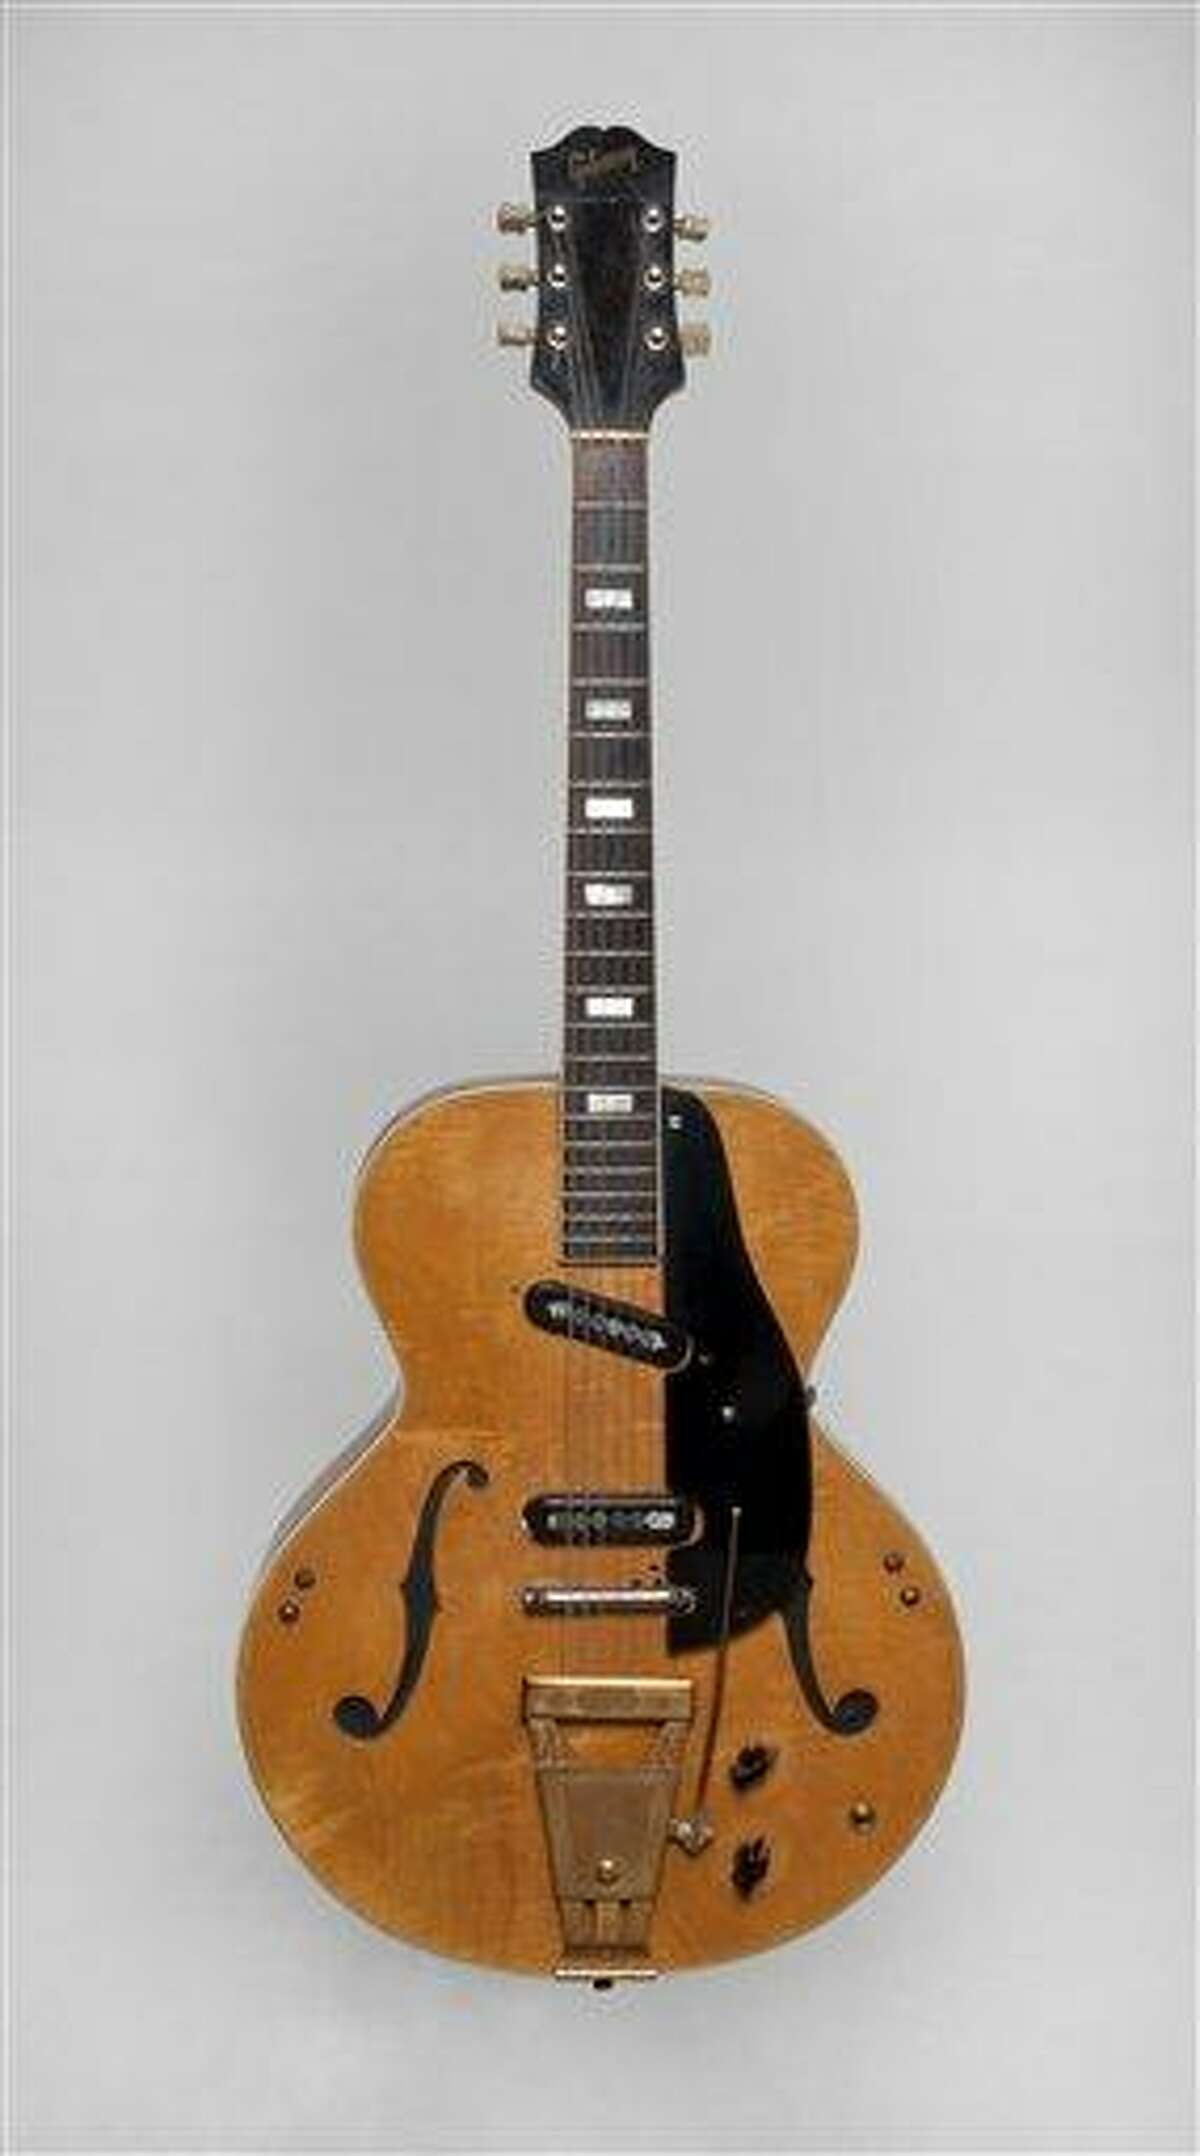 This undated image released by Julien's Auctions shows Les Paul's 1940s Epiphone Zephyr 7133 Klunker Guitar. This item is part of Les Paul's guitars and recording gear up for auction at Julien's Auctions from June 8 to June 10 in Beverly Hills, Calif. Associated Press